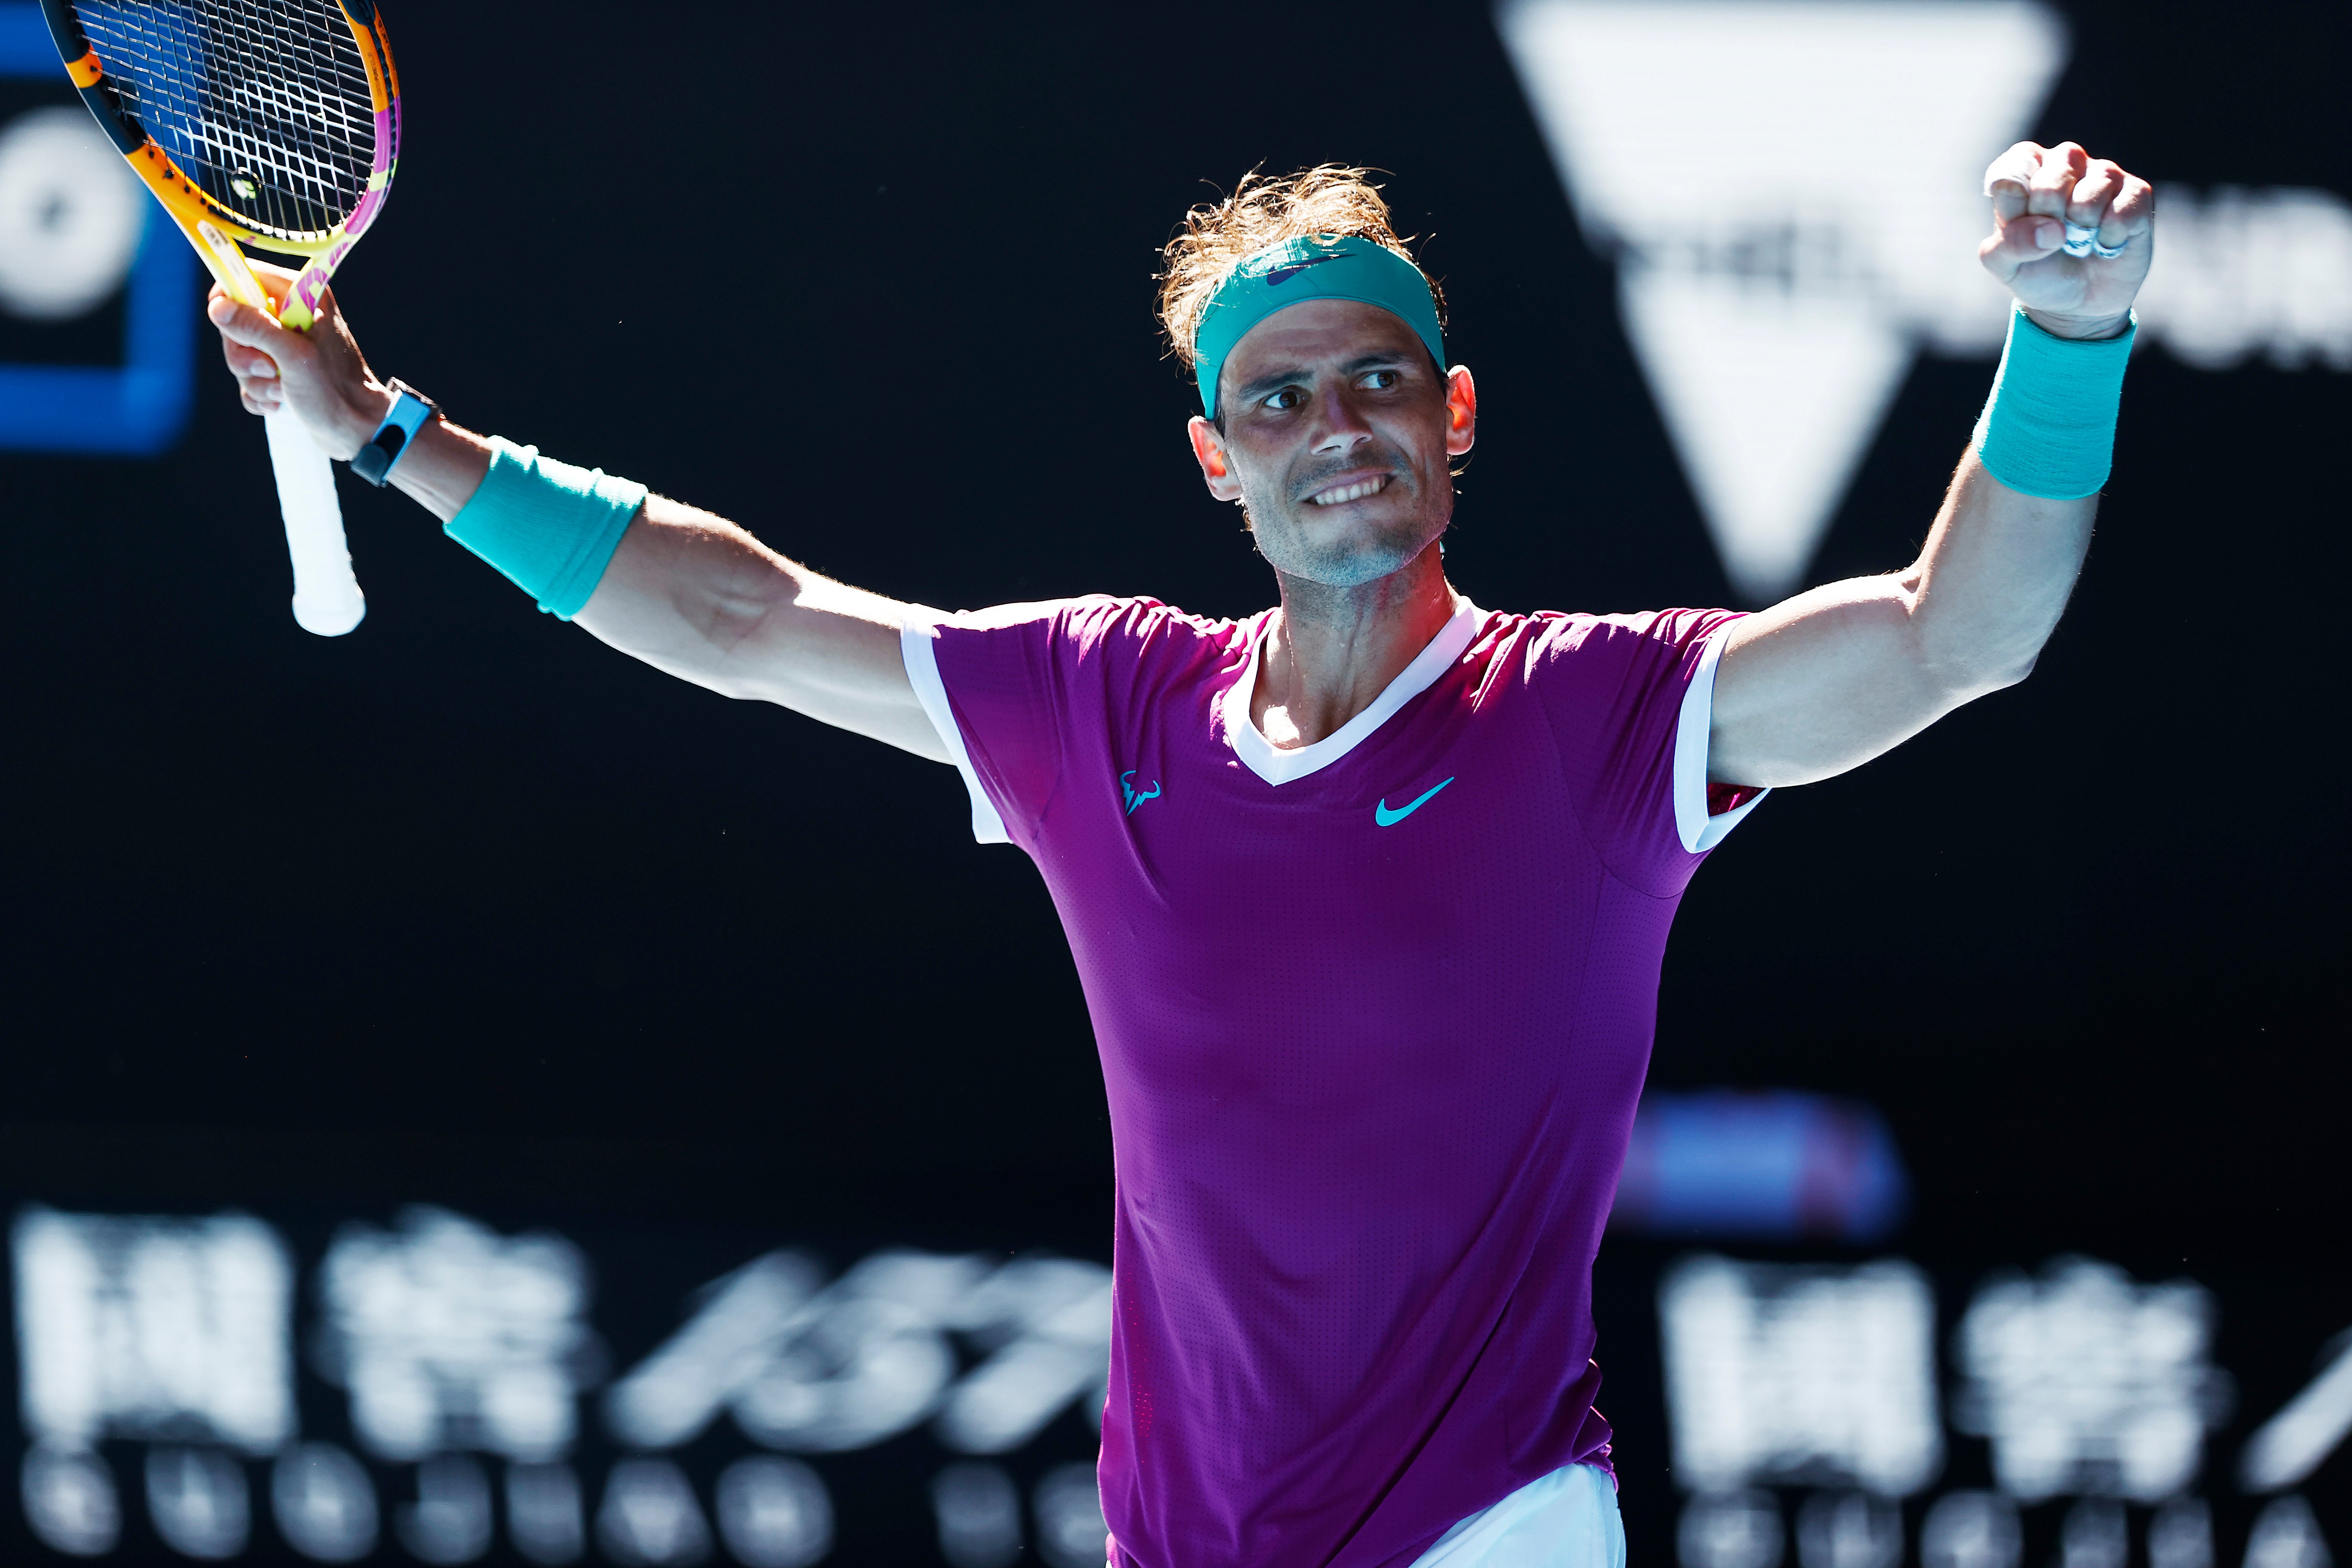 Nadal is into the third round in Melbourne